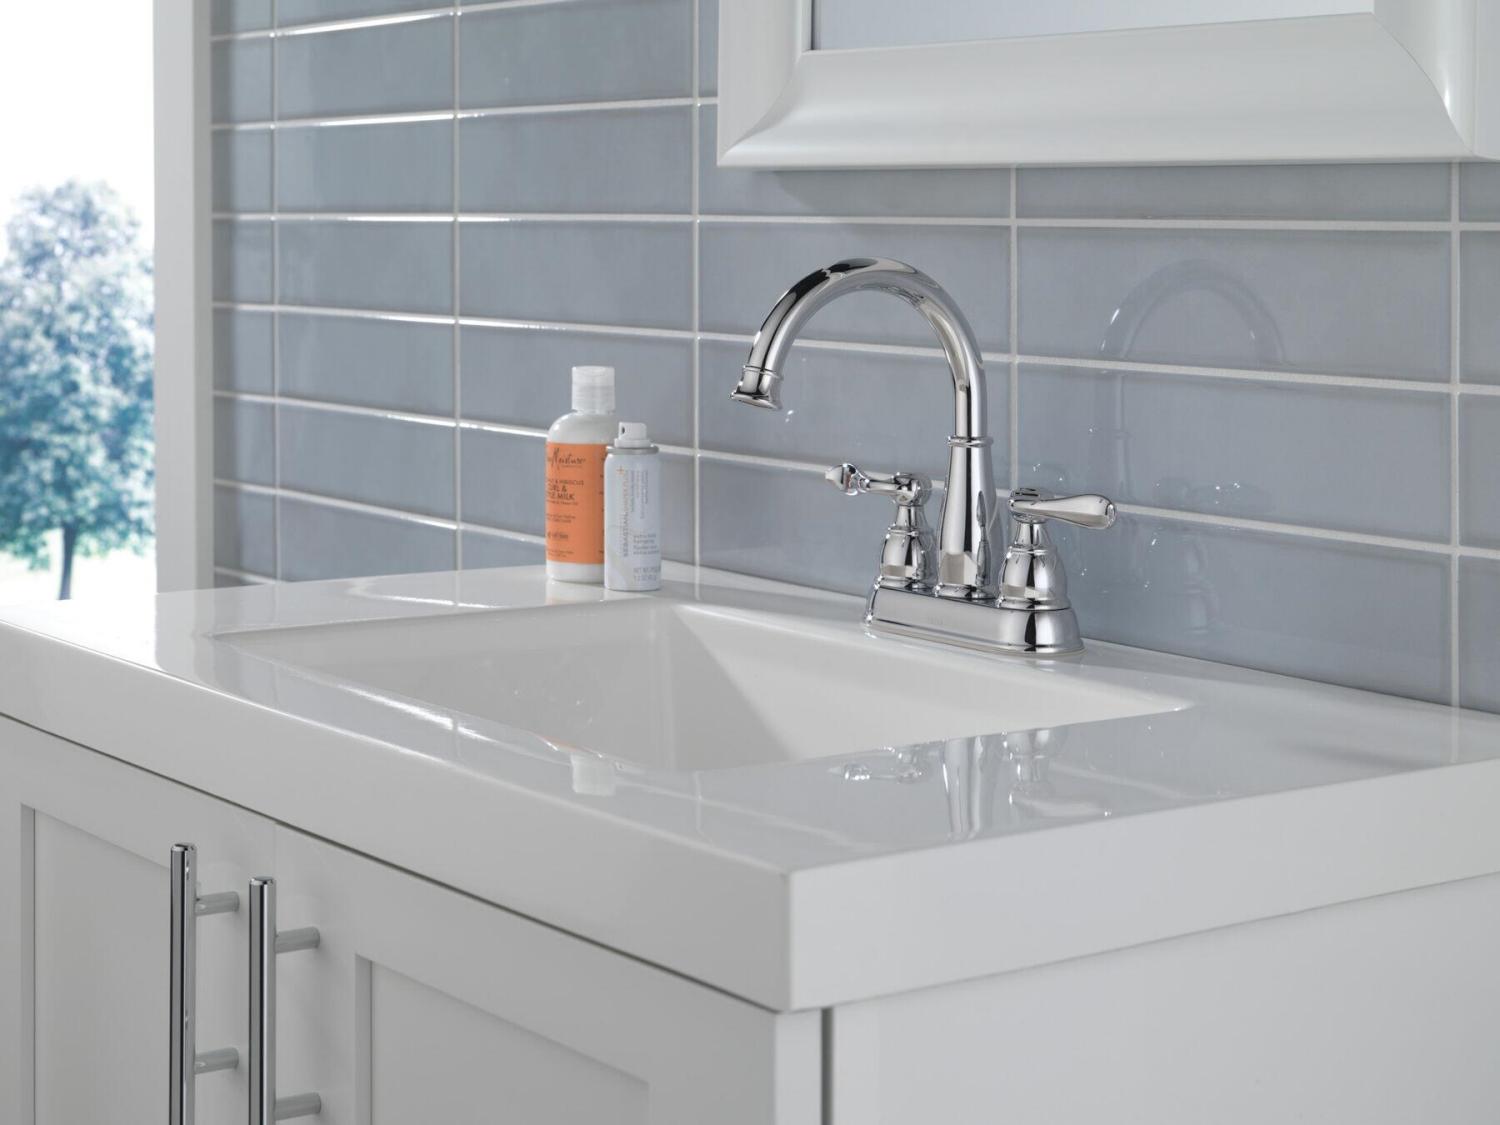 The Unveiled Dilemma of Peeling Brushed Nickel Faucets - Blog - 1